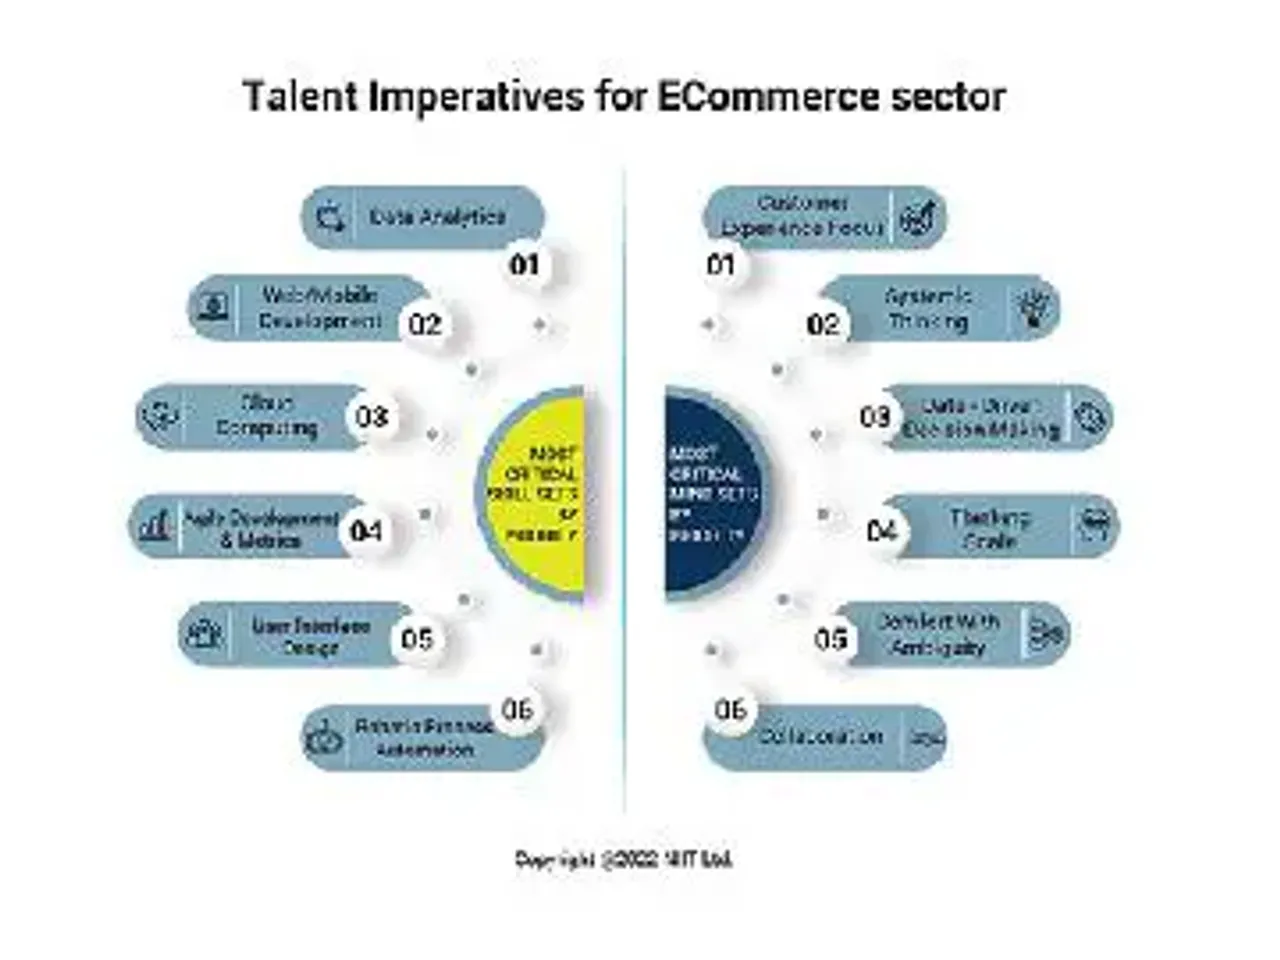 Talent Critical for India’s ECommerce Growth, Finds NIIT Survey